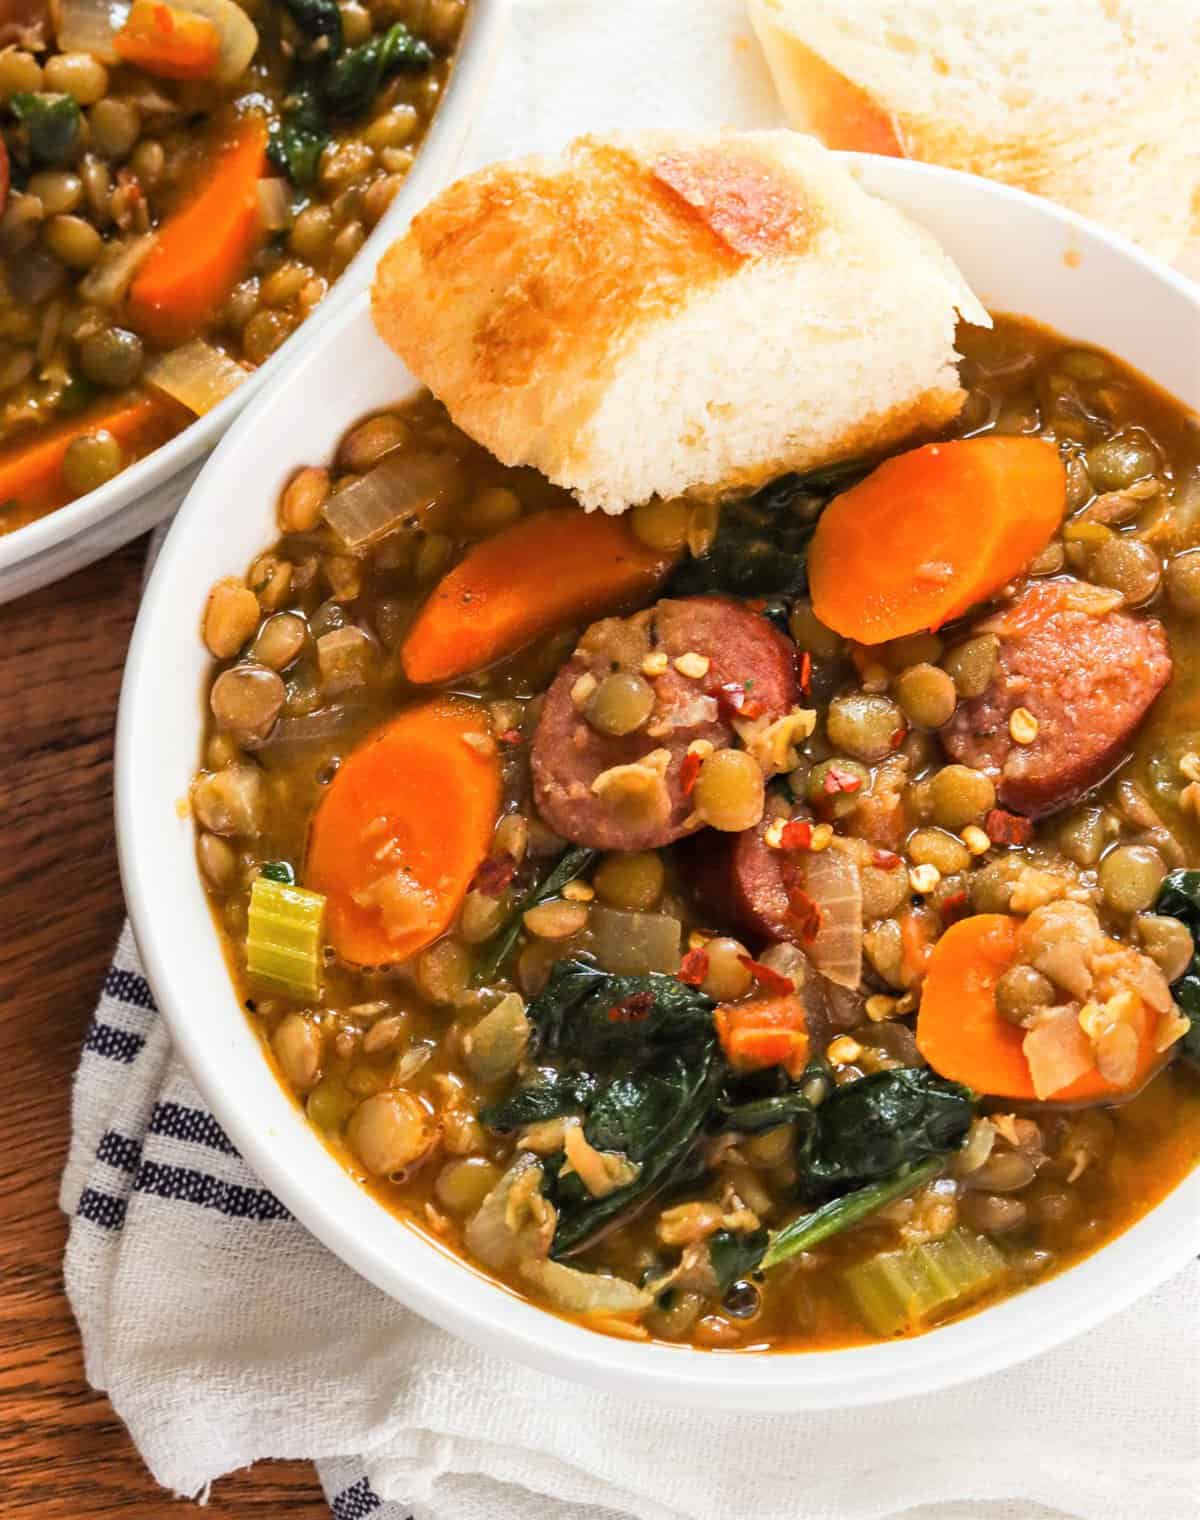 Soul-satisfying bowl of sausage lentil soup with fresh garlic bread